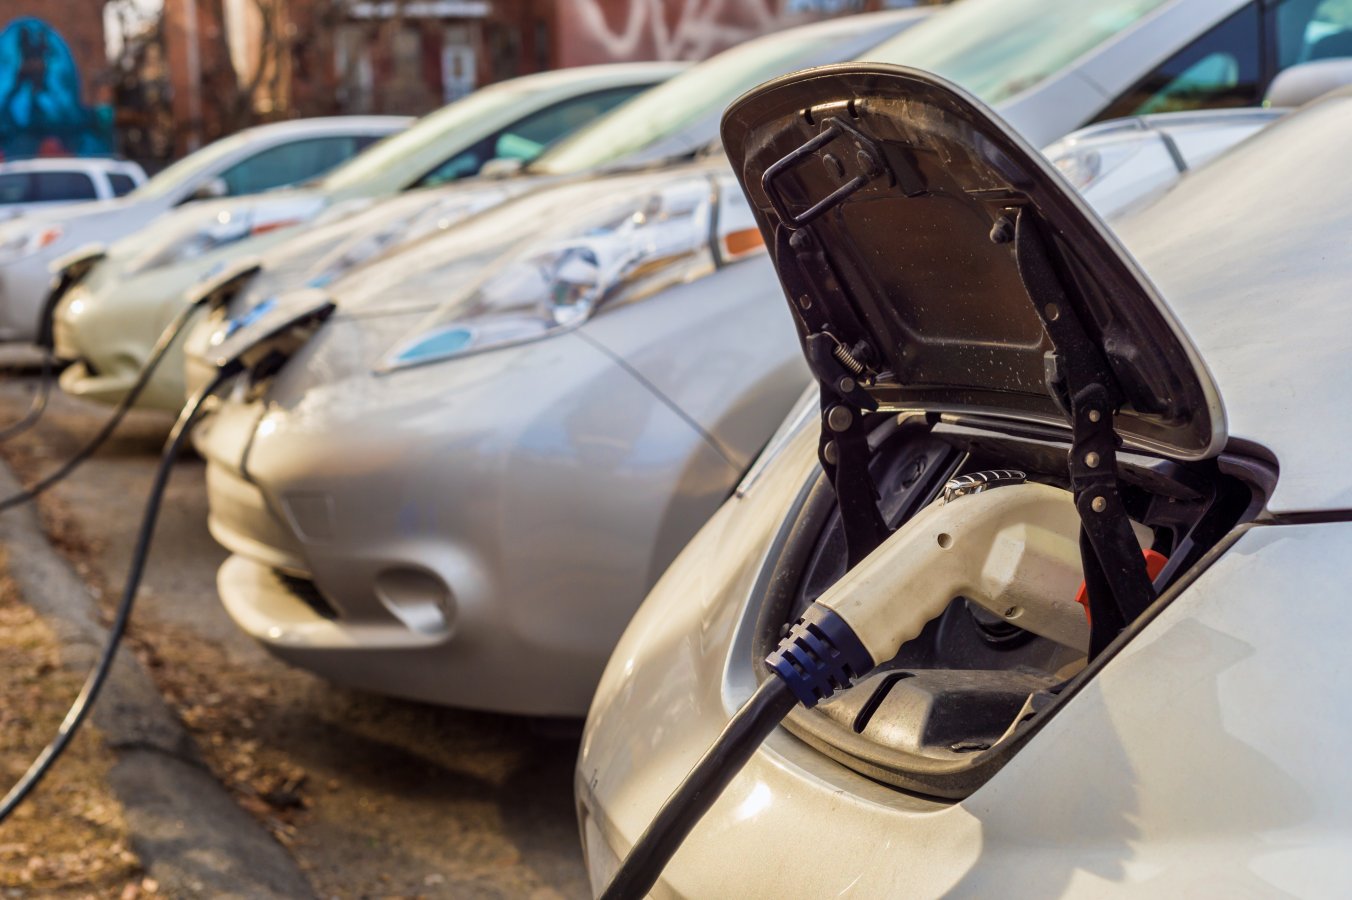 How long will the battery of an electric car last?